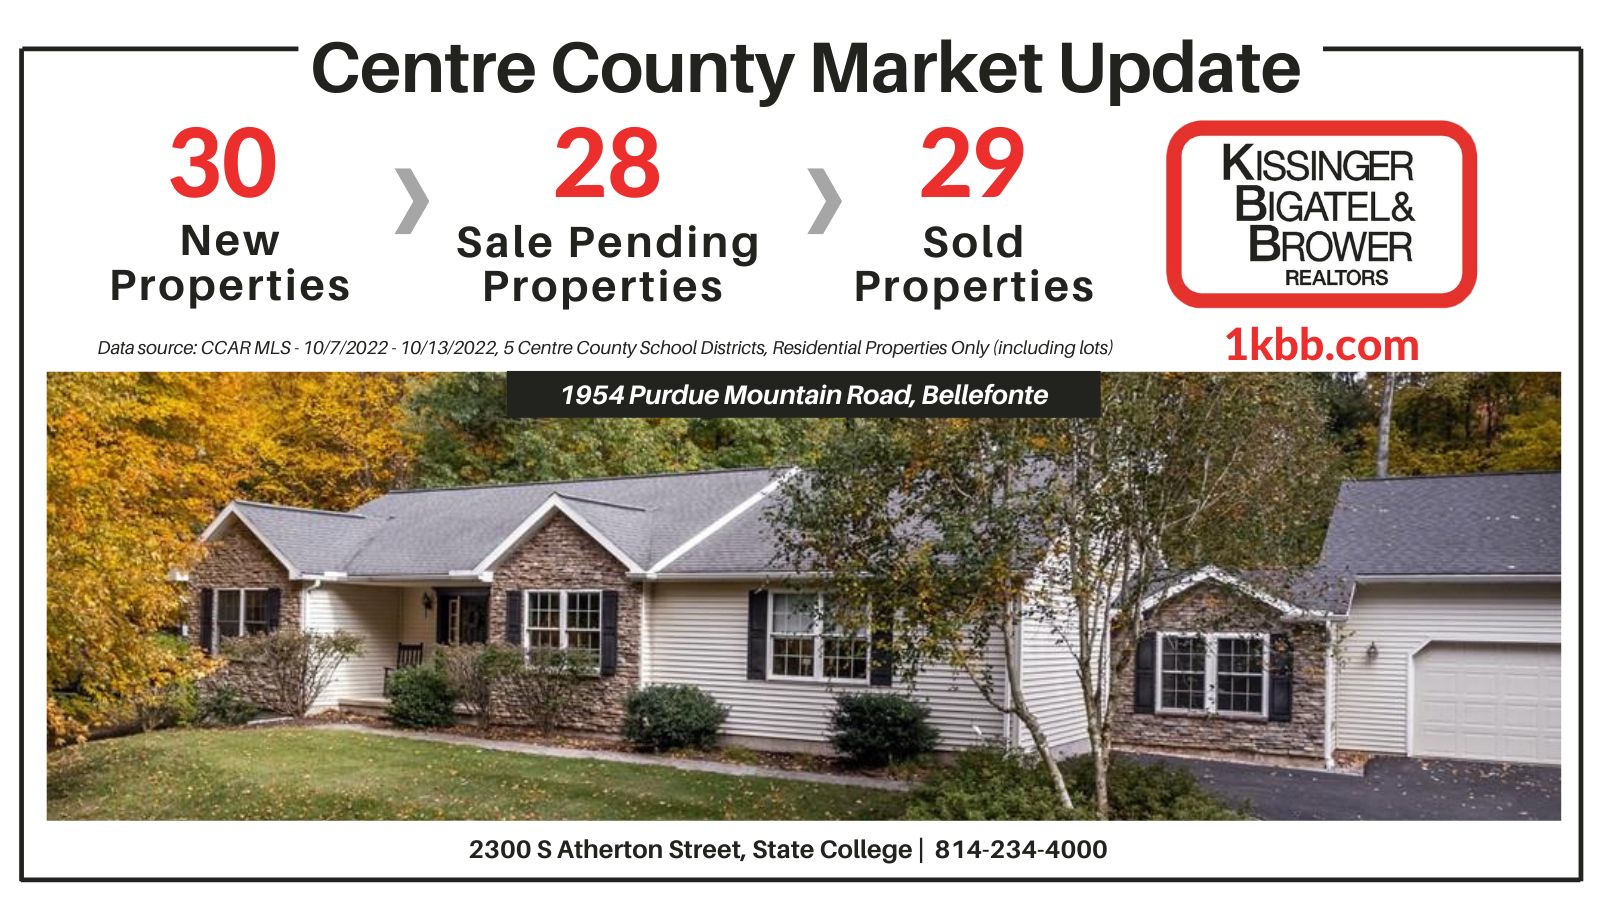 Market Update Report for 10/7-10/13/2022 in Centre County, PA